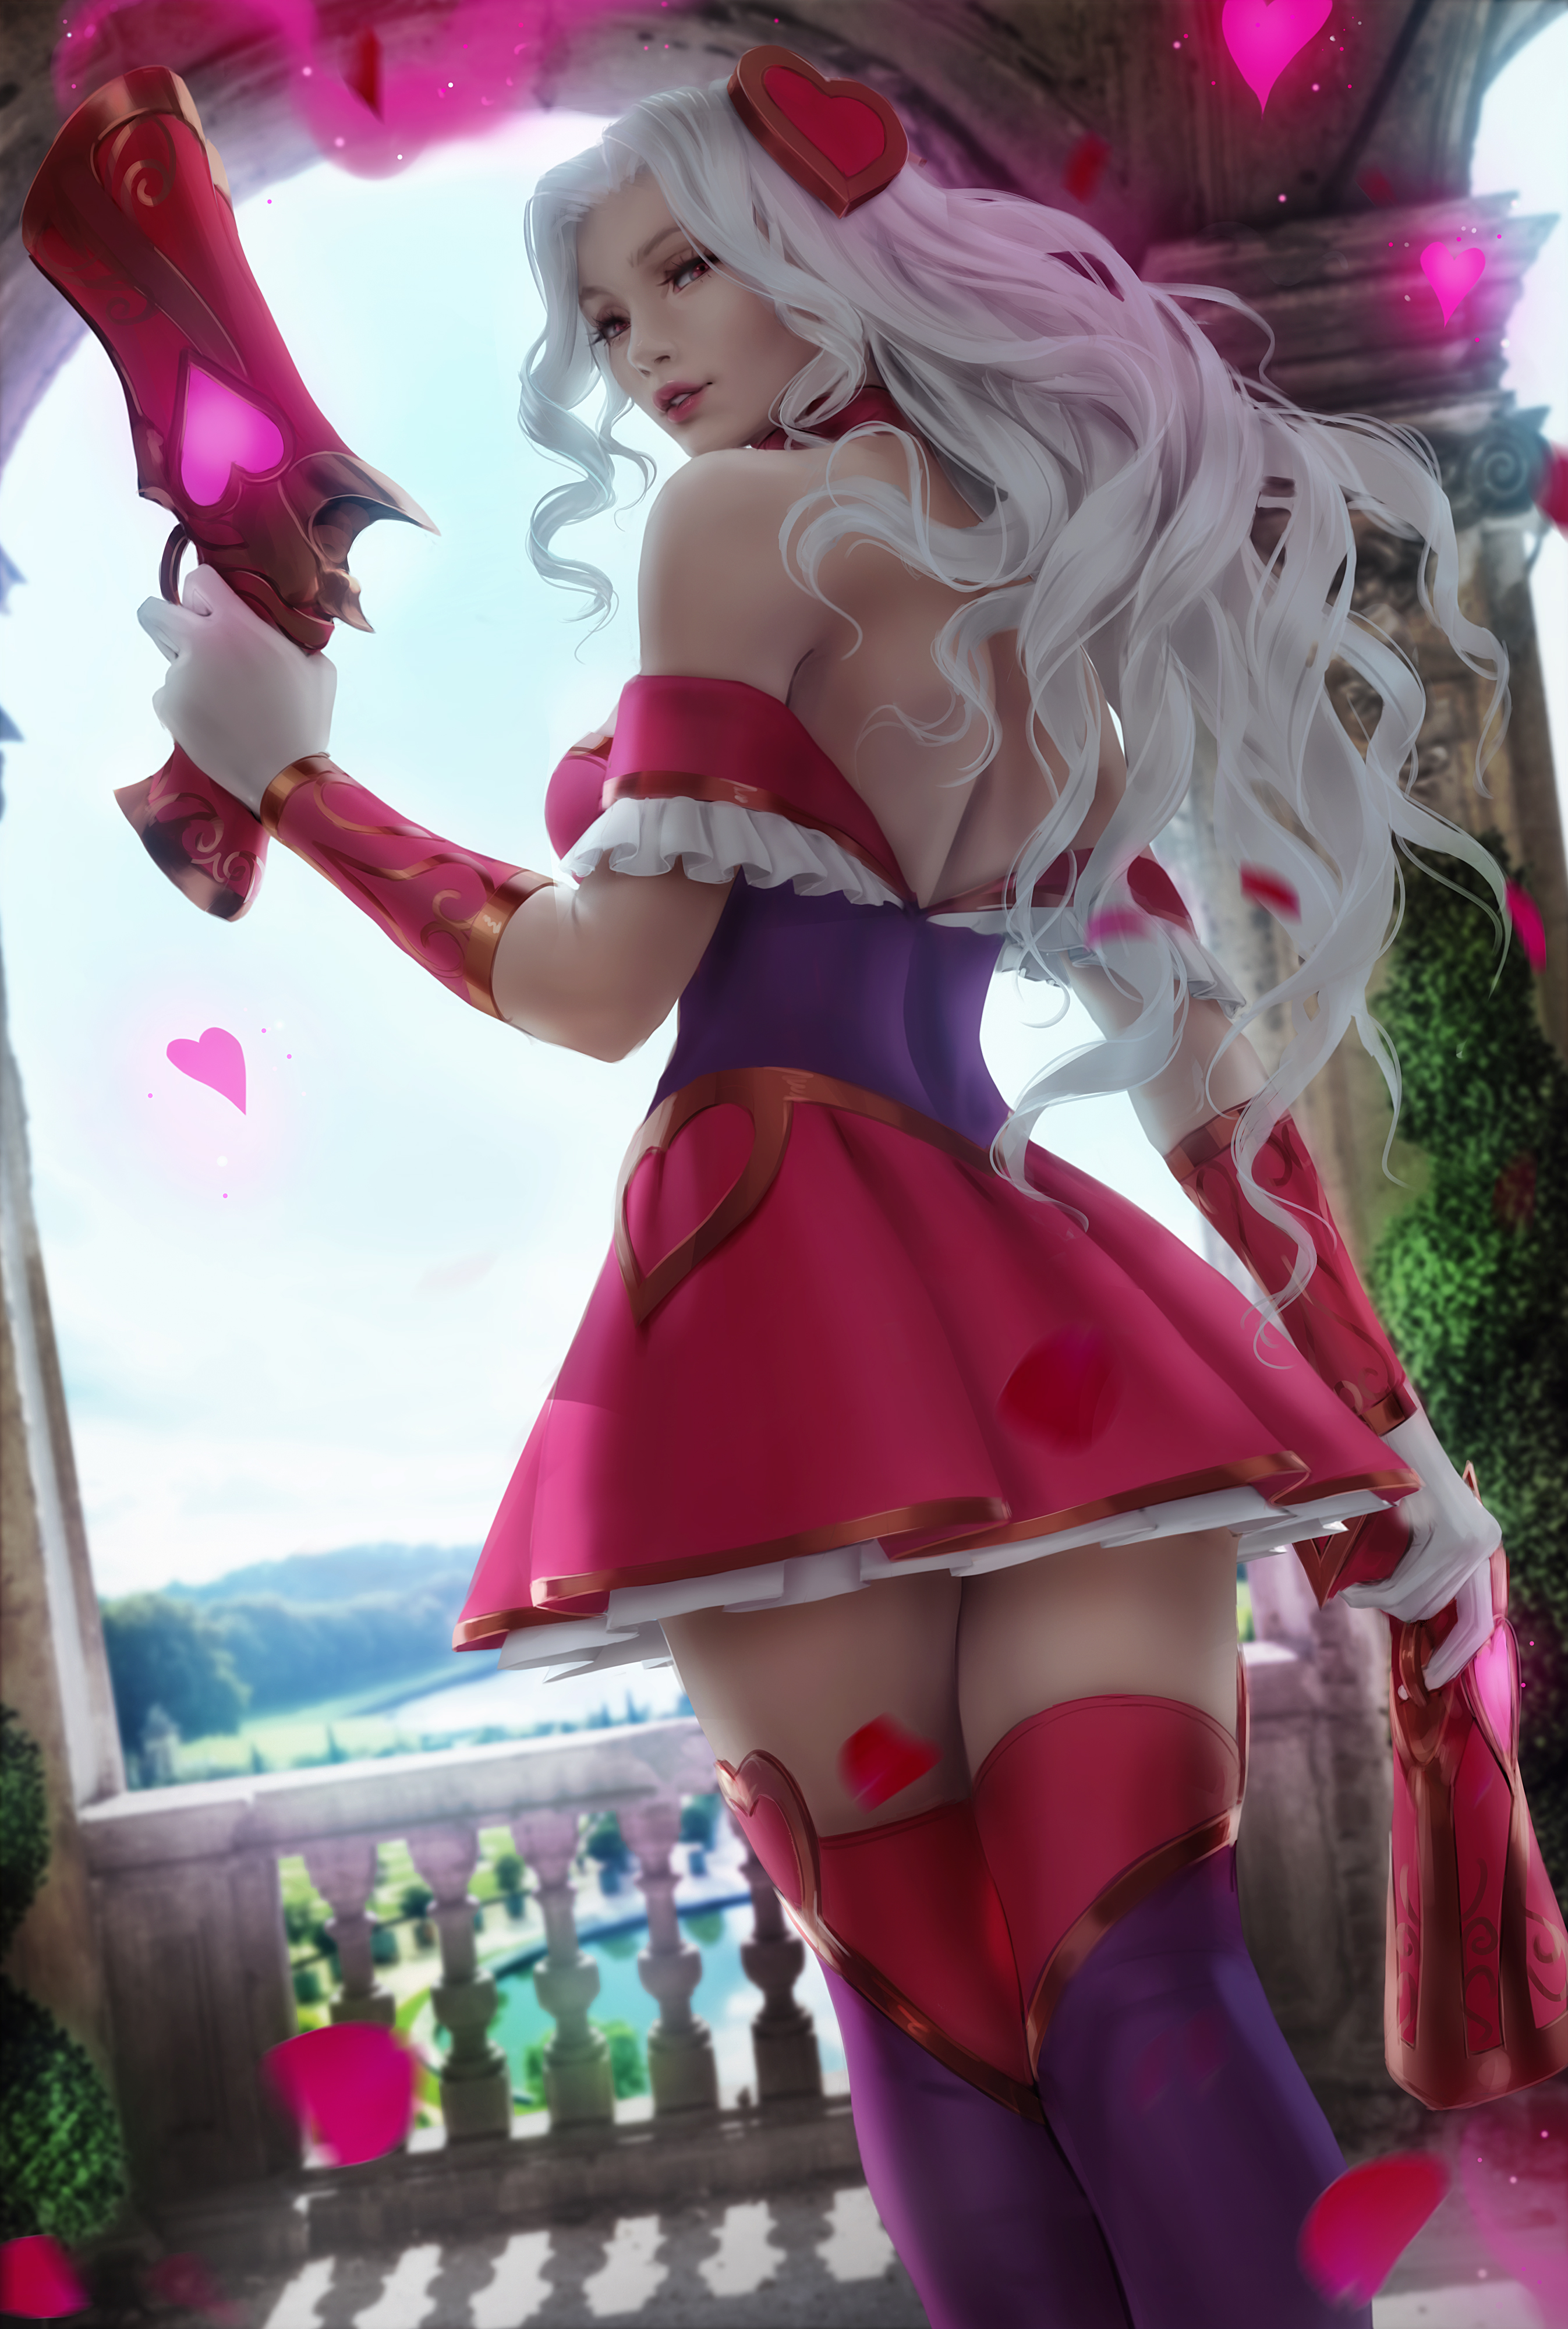 Anime Girls League Of Legends Miss Fortune League Of Legends Zarory Dress White Hair 2693x4000